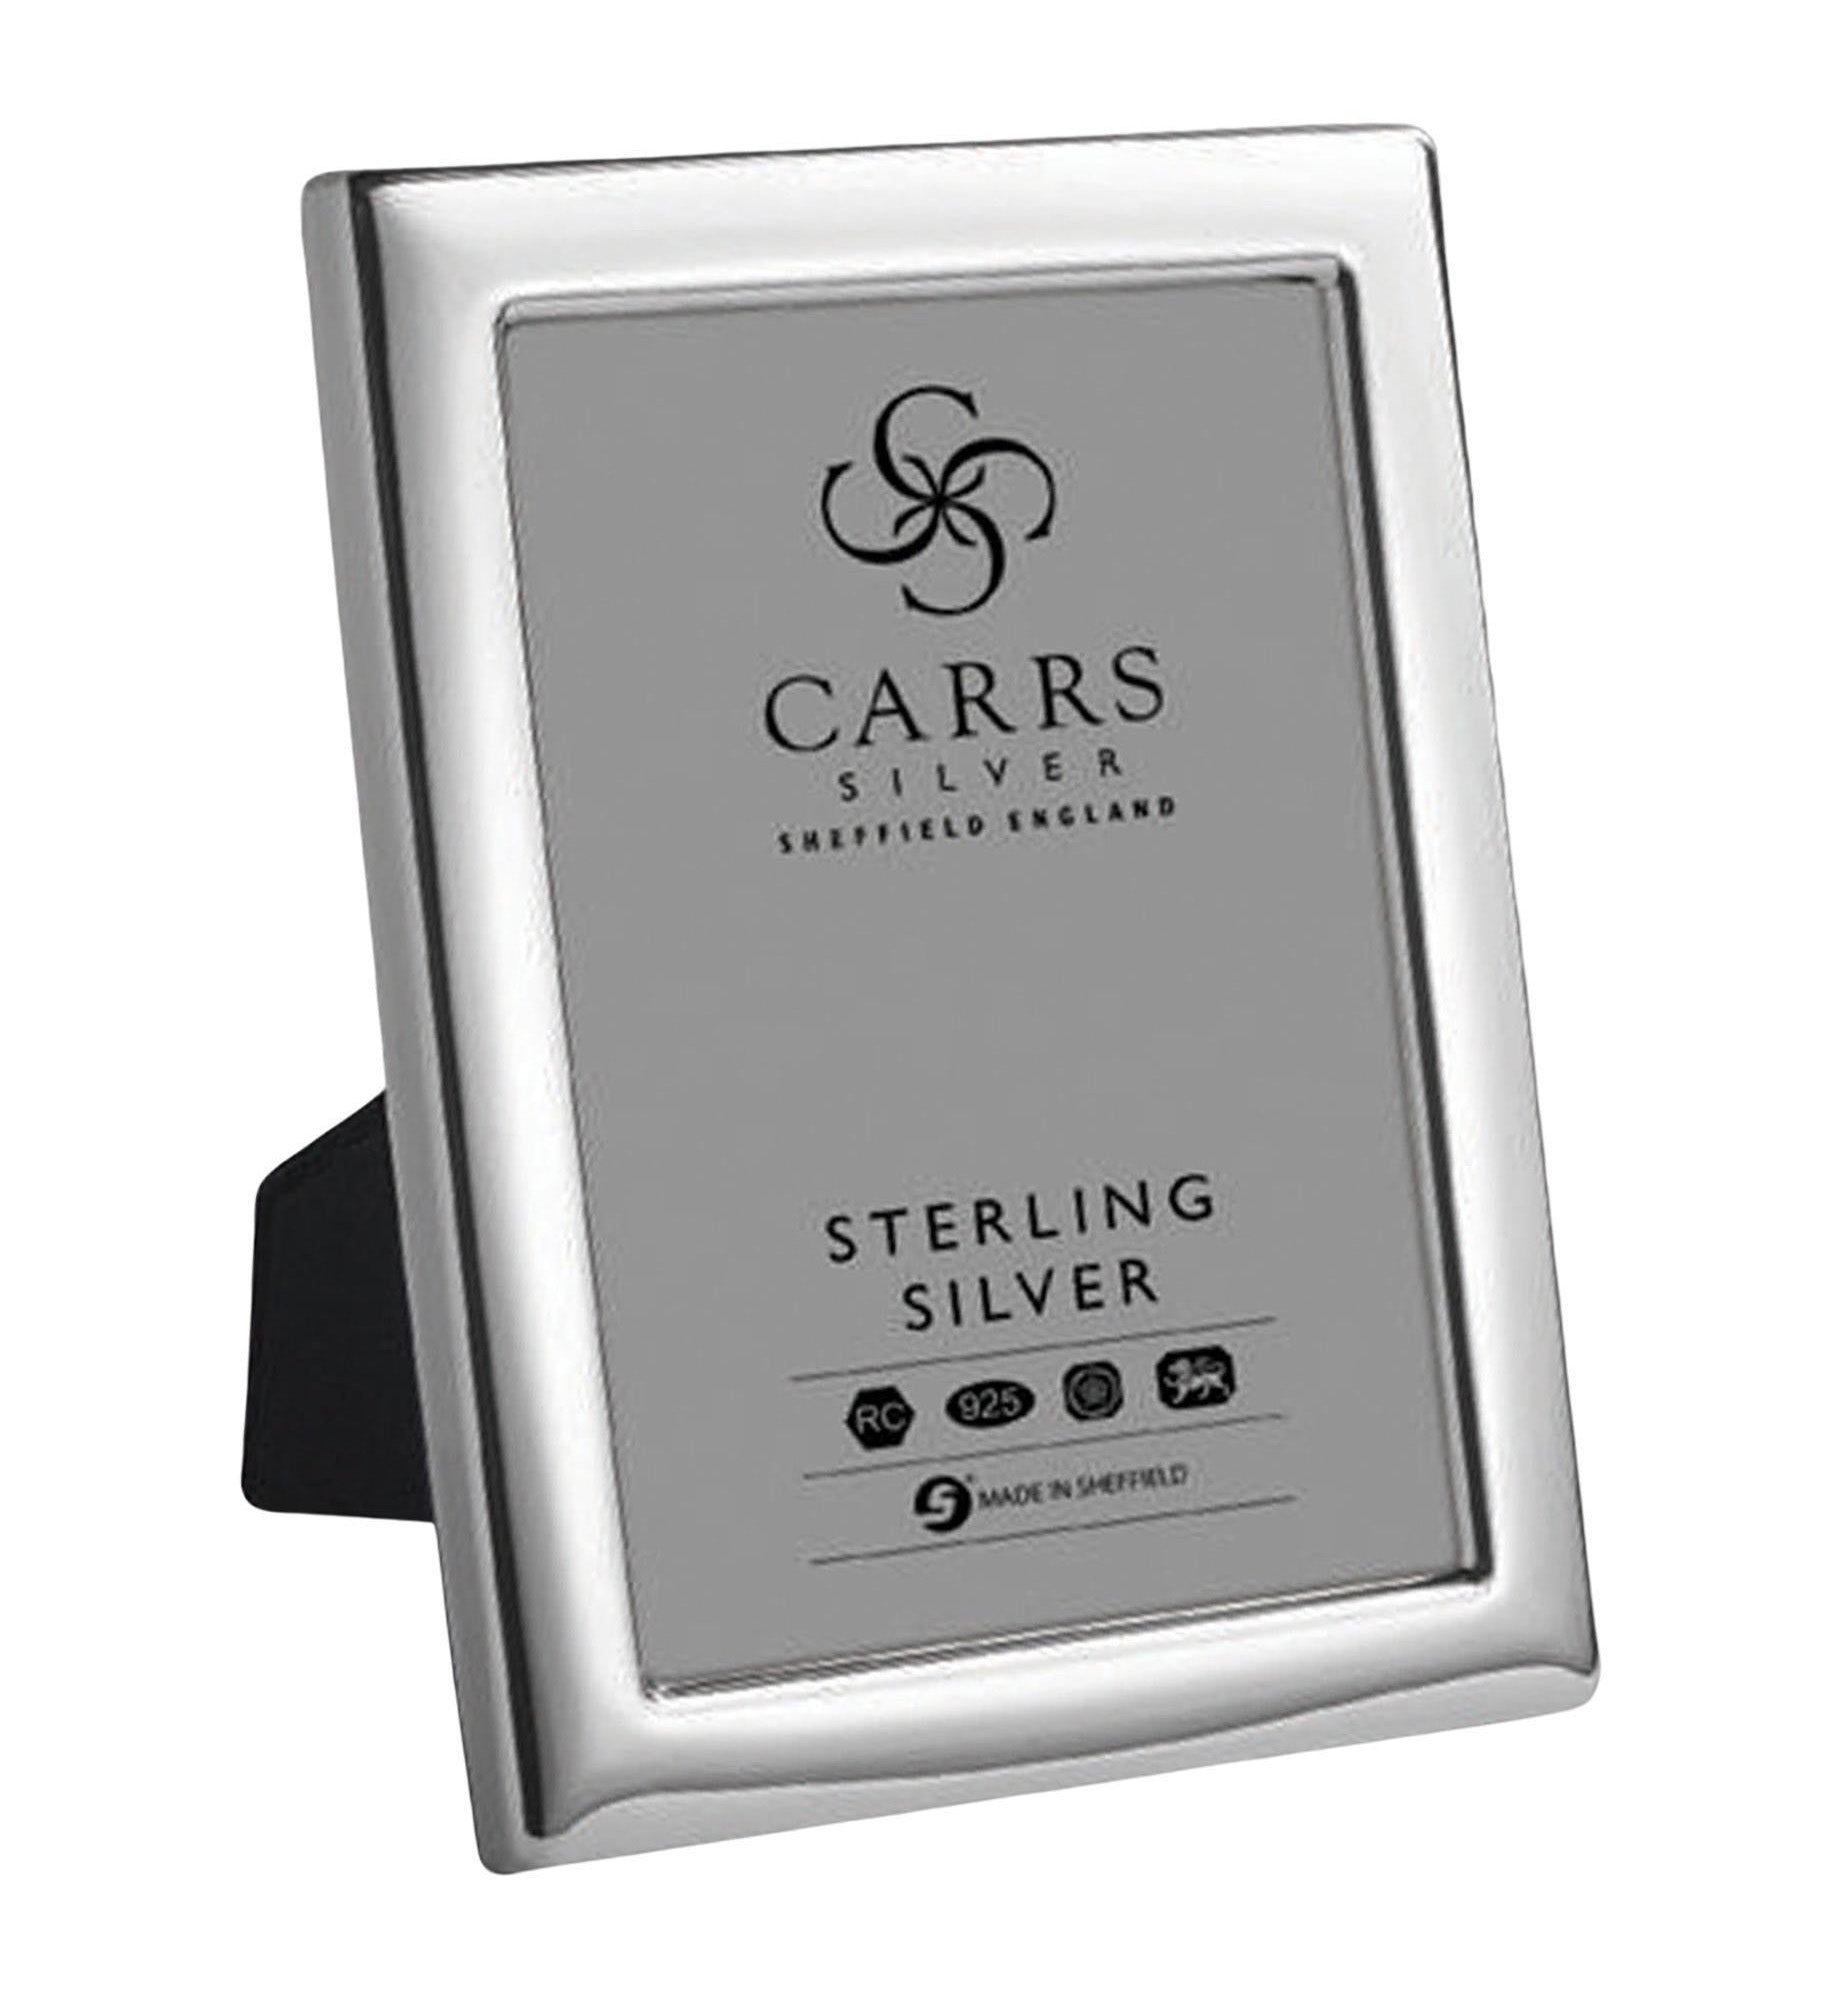 English Sterling Silver Photograph Frame 7 x 5 inches